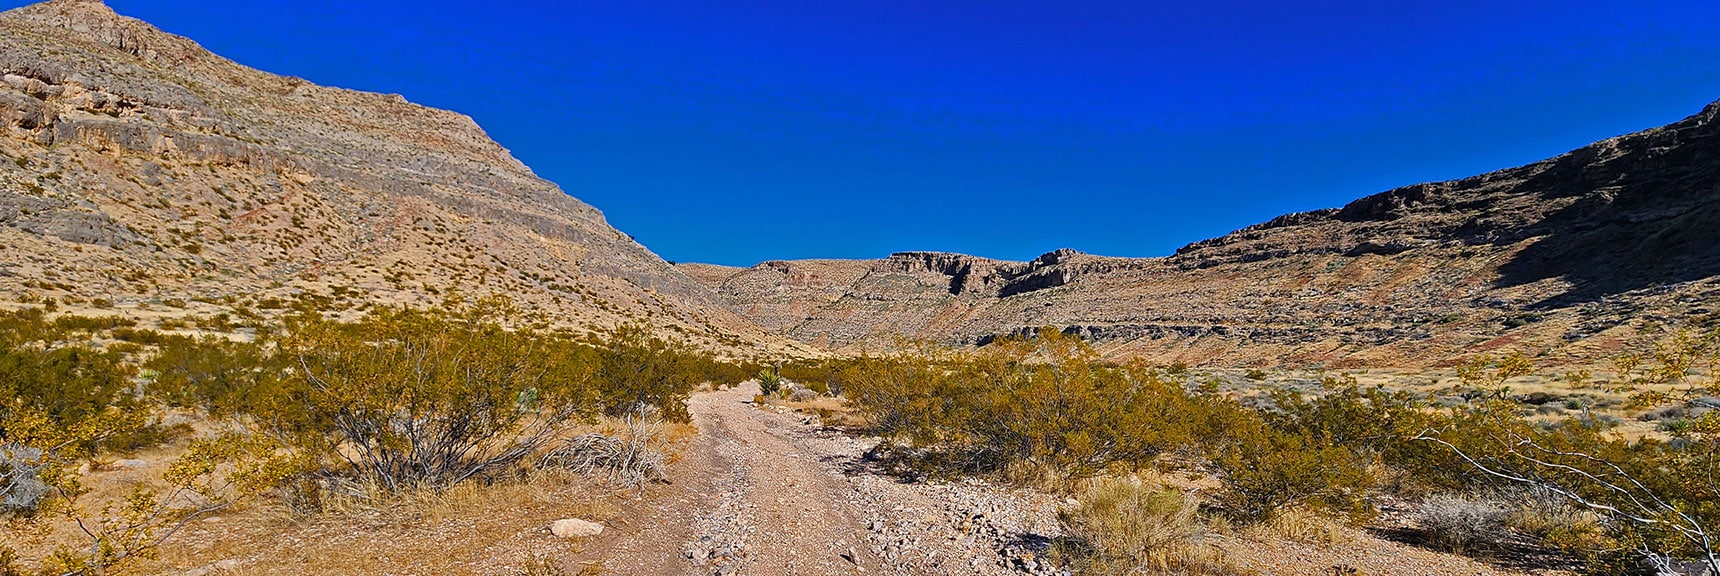 Note More Gradual Summit Inclines in This Canyon. | Landmark Bluff | Lovell Canyon, Nevada